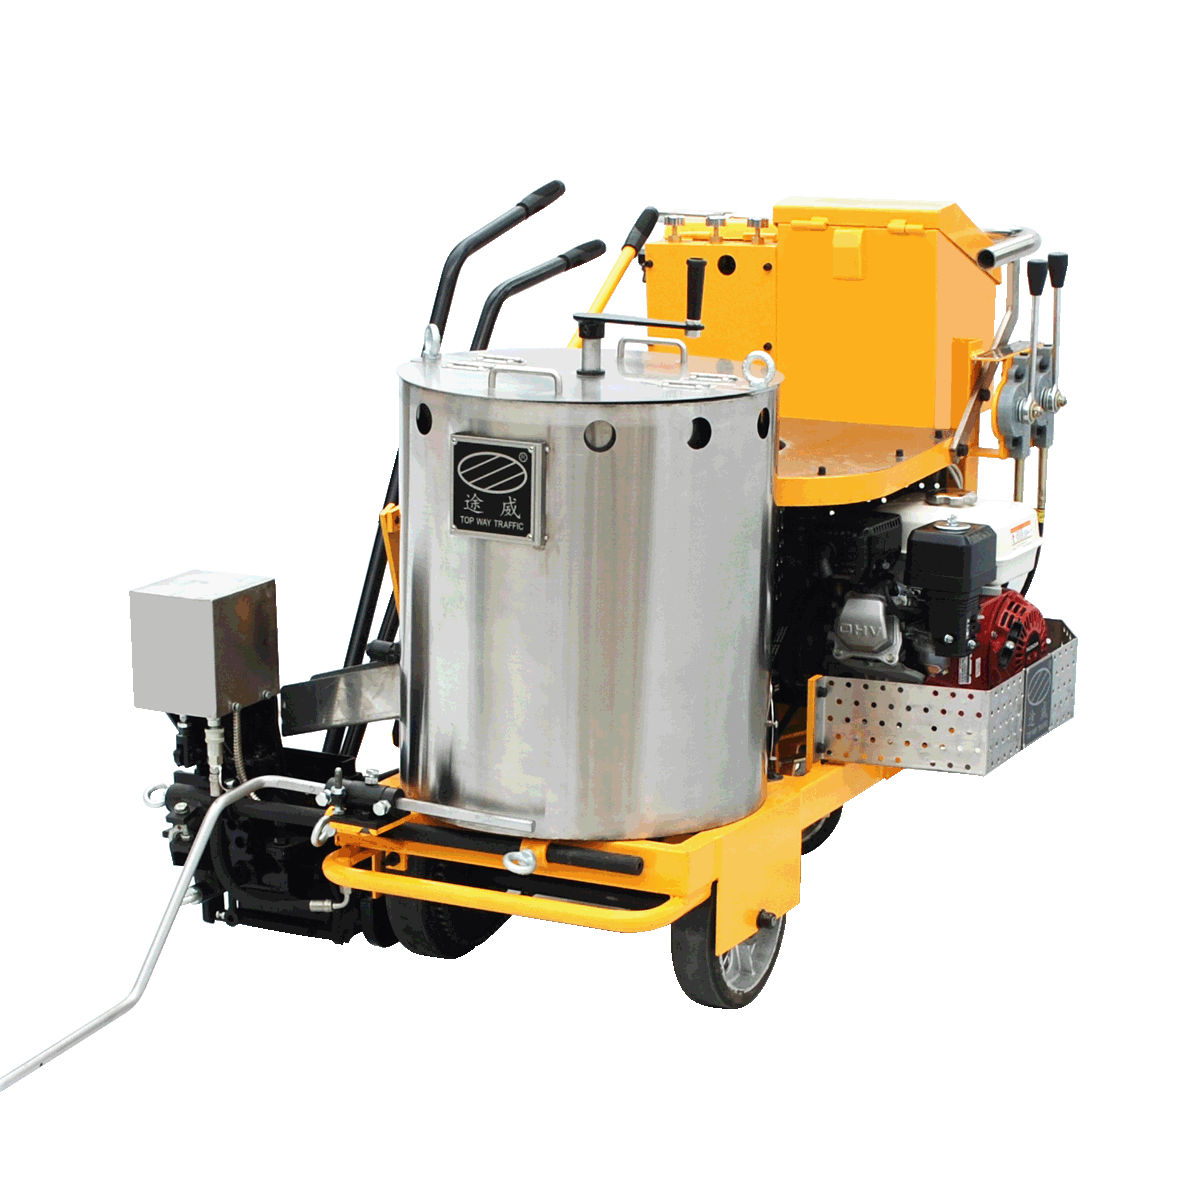 TW-V Self-propelled Thermoplastic Vibrating Road Marking Machine